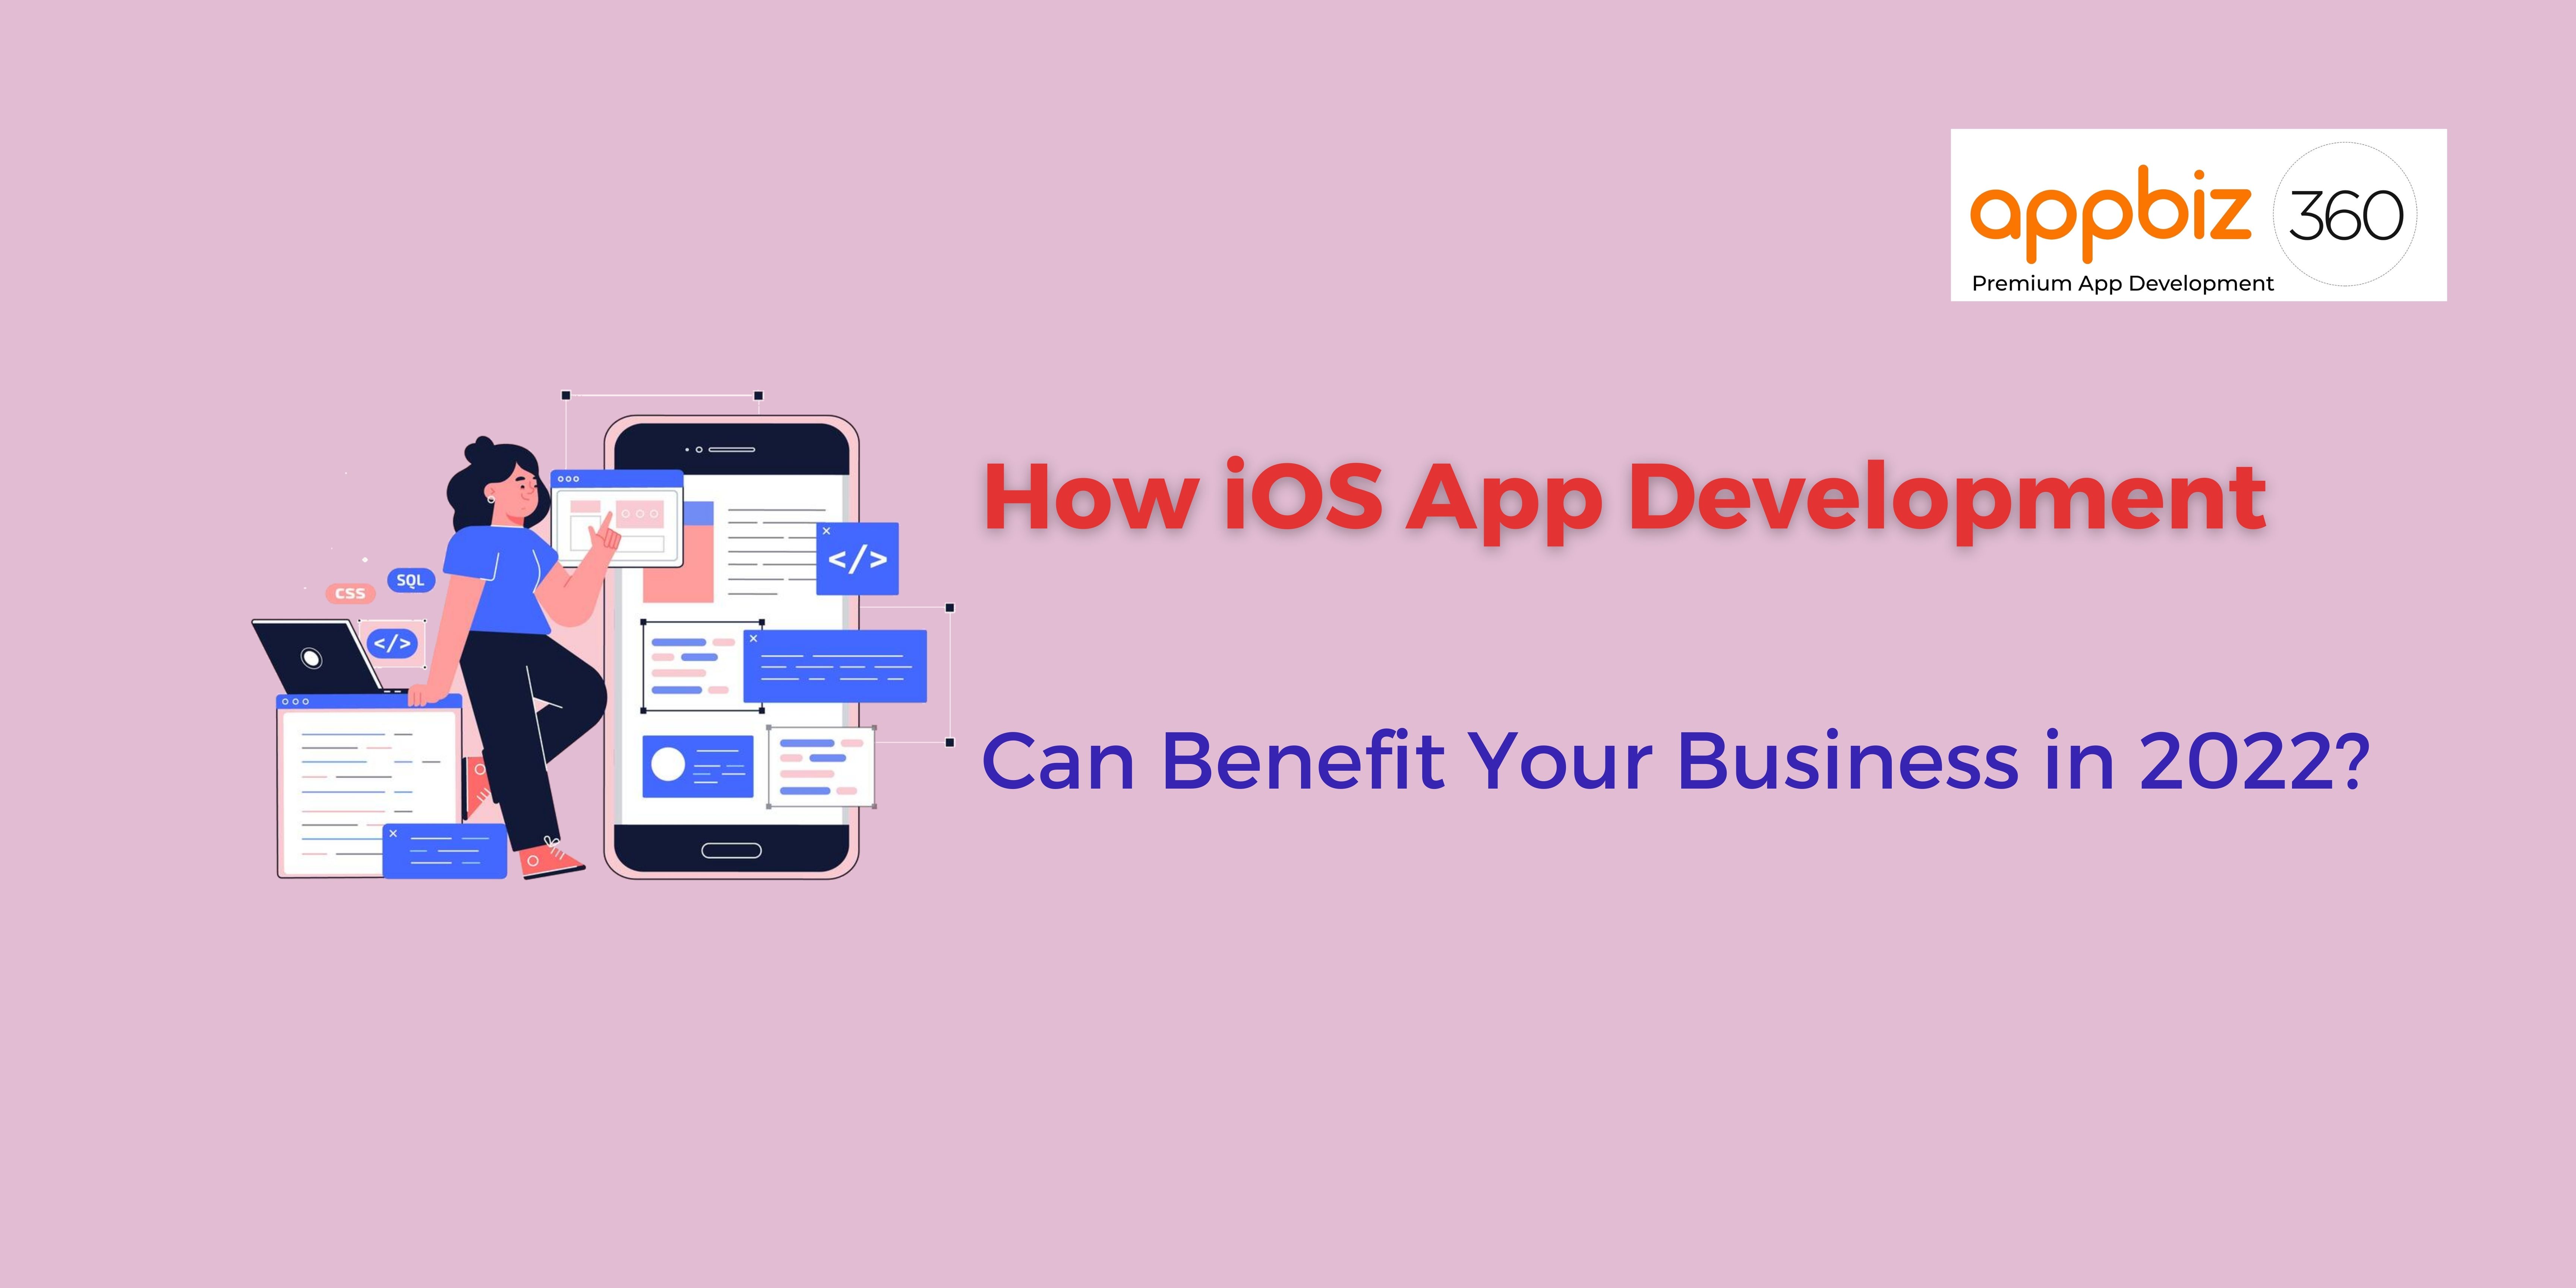 How iOS App Development Can Benefit Your Business in 2022?